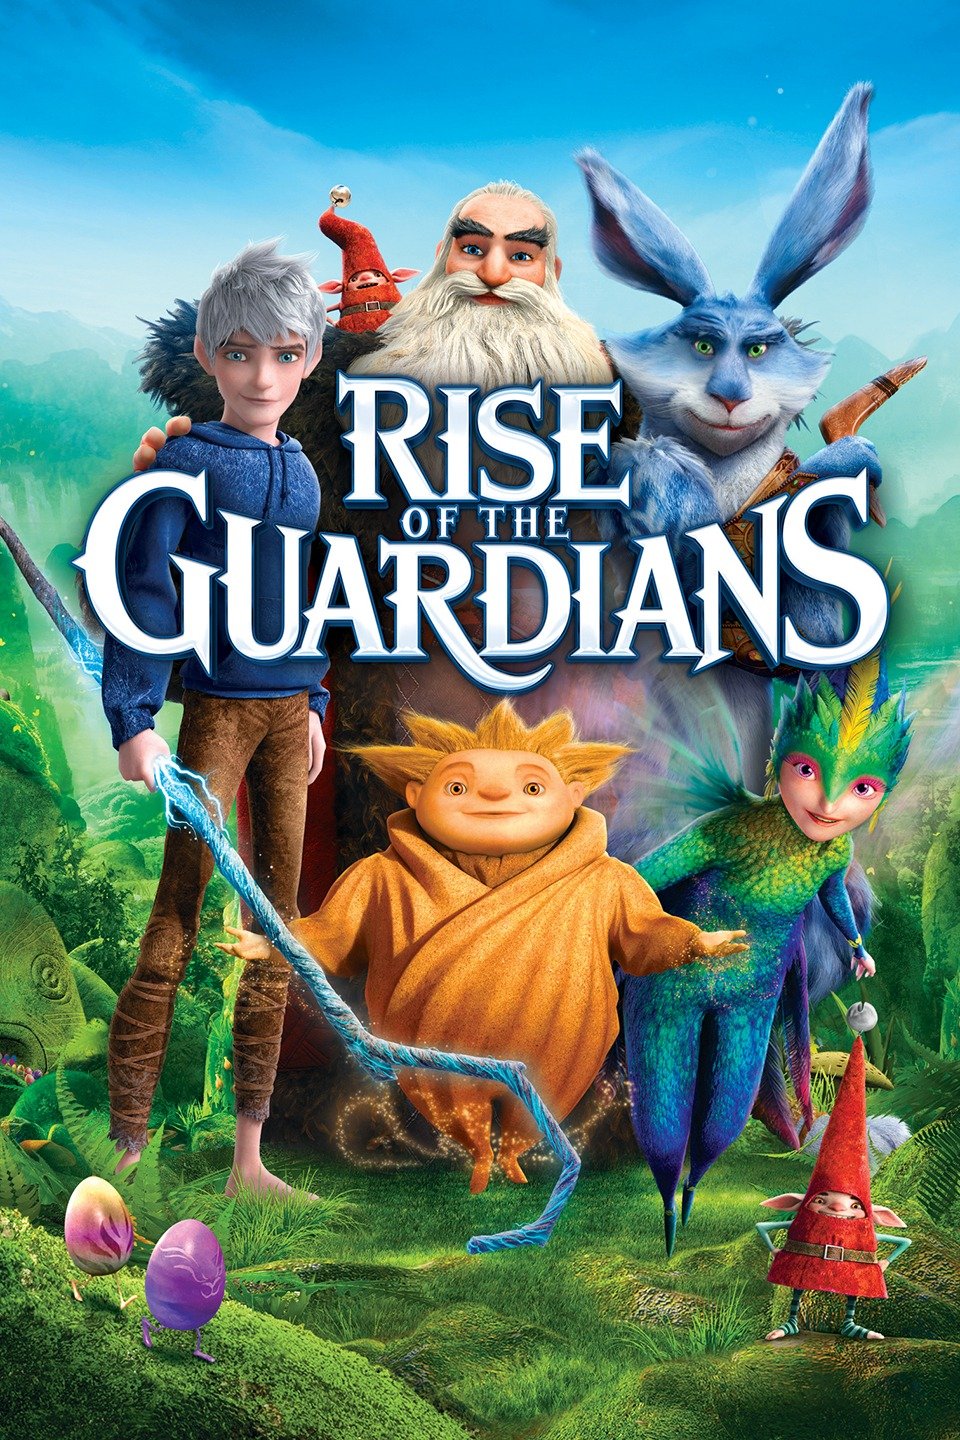 Iamge of "Rise of the Guardians"